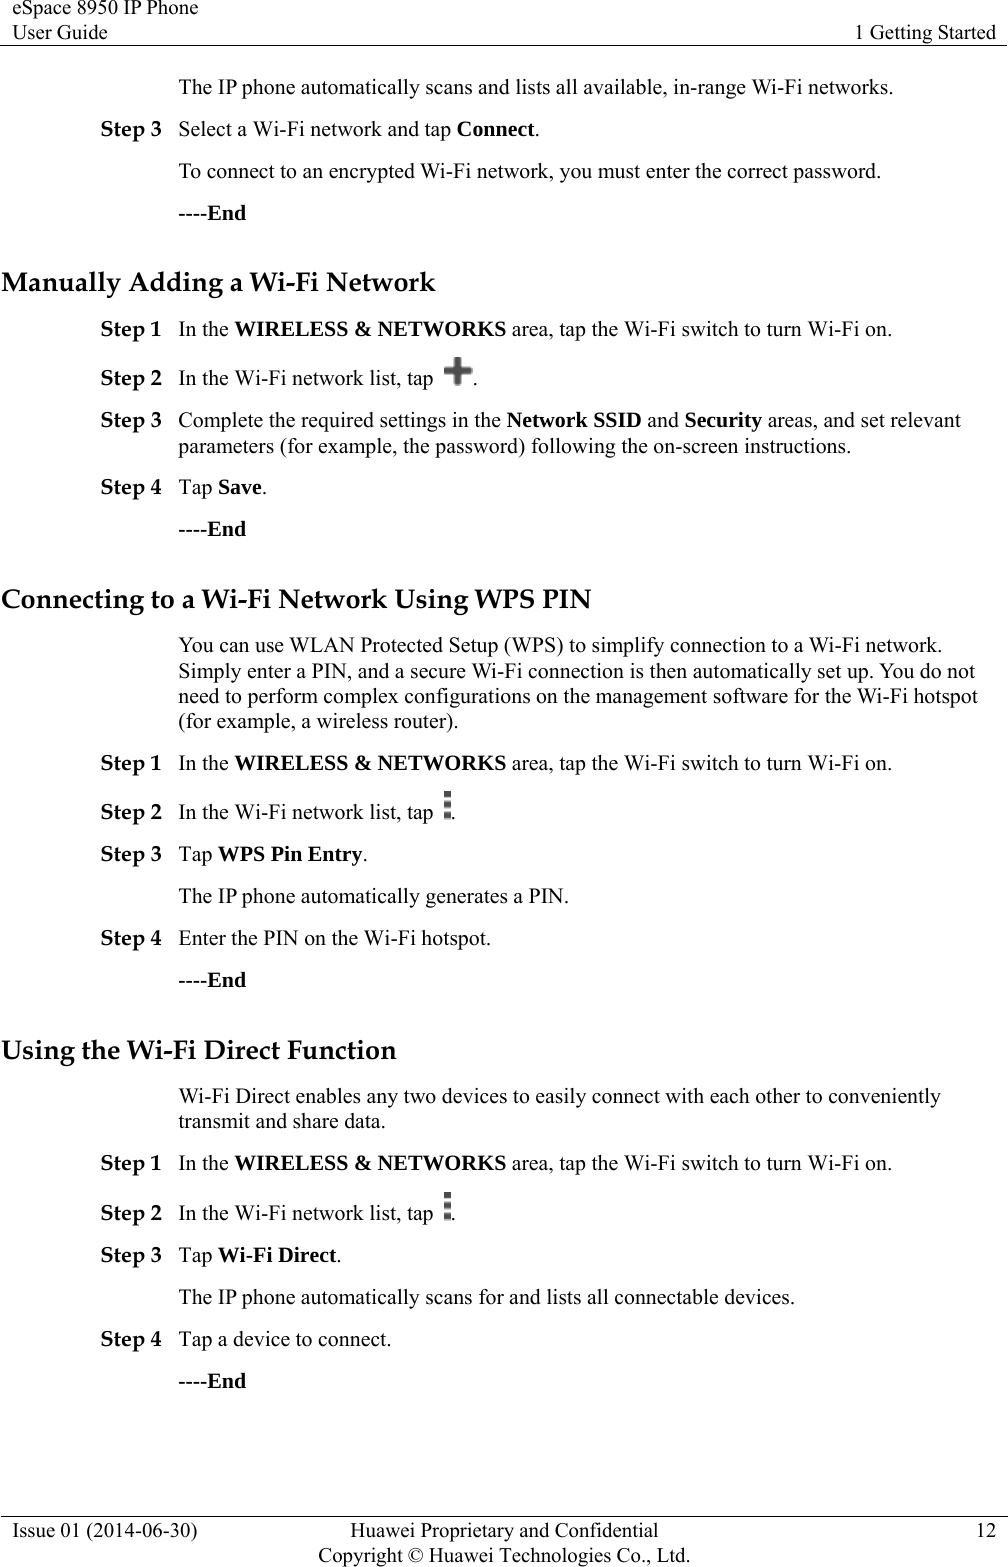 eSpace 8950 IP Phone User Guide  1 Getting Started Issue 01 (2014-06-30)  Huawei Proprietary and Confidential         Copyright © Huawei Technologies Co., Ltd.12 The IP phone automatically scans and lists all available, in-range Wi-Fi networks. Step 3 Select a Wi-Fi network and tap Connect. To connect to an encrypted Wi-Fi network, you must enter the correct password. ----End Manually Adding a Wi-Fi Network Step 1 In the WIRELESS &amp; NETWORKS area, tap the Wi-Fi switch to turn Wi-Fi on. Step 2 In the Wi-Fi network list, tap  . Step 3 Complete the required settings in the Network SSID and Security areas, and set relevant parameters (for example, the password) following the on-screen instructions. Step 4 Tap Save. ----End Connecting to a Wi-Fi Network Using WPS PIN You can use WLAN Protected Setup (WPS) to simplify connection to a Wi-Fi network. Simply enter a PIN, and a secure Wi-Fi connection is then automatically set up. You do not need to perform complex configurations on the management software for the Wi-Fi hotspot (for example, a wireless router). Step 1 In the WIRELESS &amp; NETWORKS area, tap the Wi-Fi switch to turn Wi-Fi on. Step 2 In the Wi-Fi network list, tap  . Step 3 Tap WPS Pin Entry. The IP phone automatically generates a PIN. Step 4 Enter the PIN on the Wi-Fi hotspot. ----End Using the Wi-Fi Direct Function Wi-Fi Direct enables any two devices to easily connect with each other to conveniently transmit and share data. Step 1 In the WIRELESS &amp; NETWORKS area, tap the Wi-Fi switch to turn Wi-Fi on. Step 2 In the Wi-Fi network list, tap  . Step 3 Tap Wi-Fi Direct. The IP phone automatically scans for and lists all connectable devices. Step 4 Tap a device to connect. ----End 